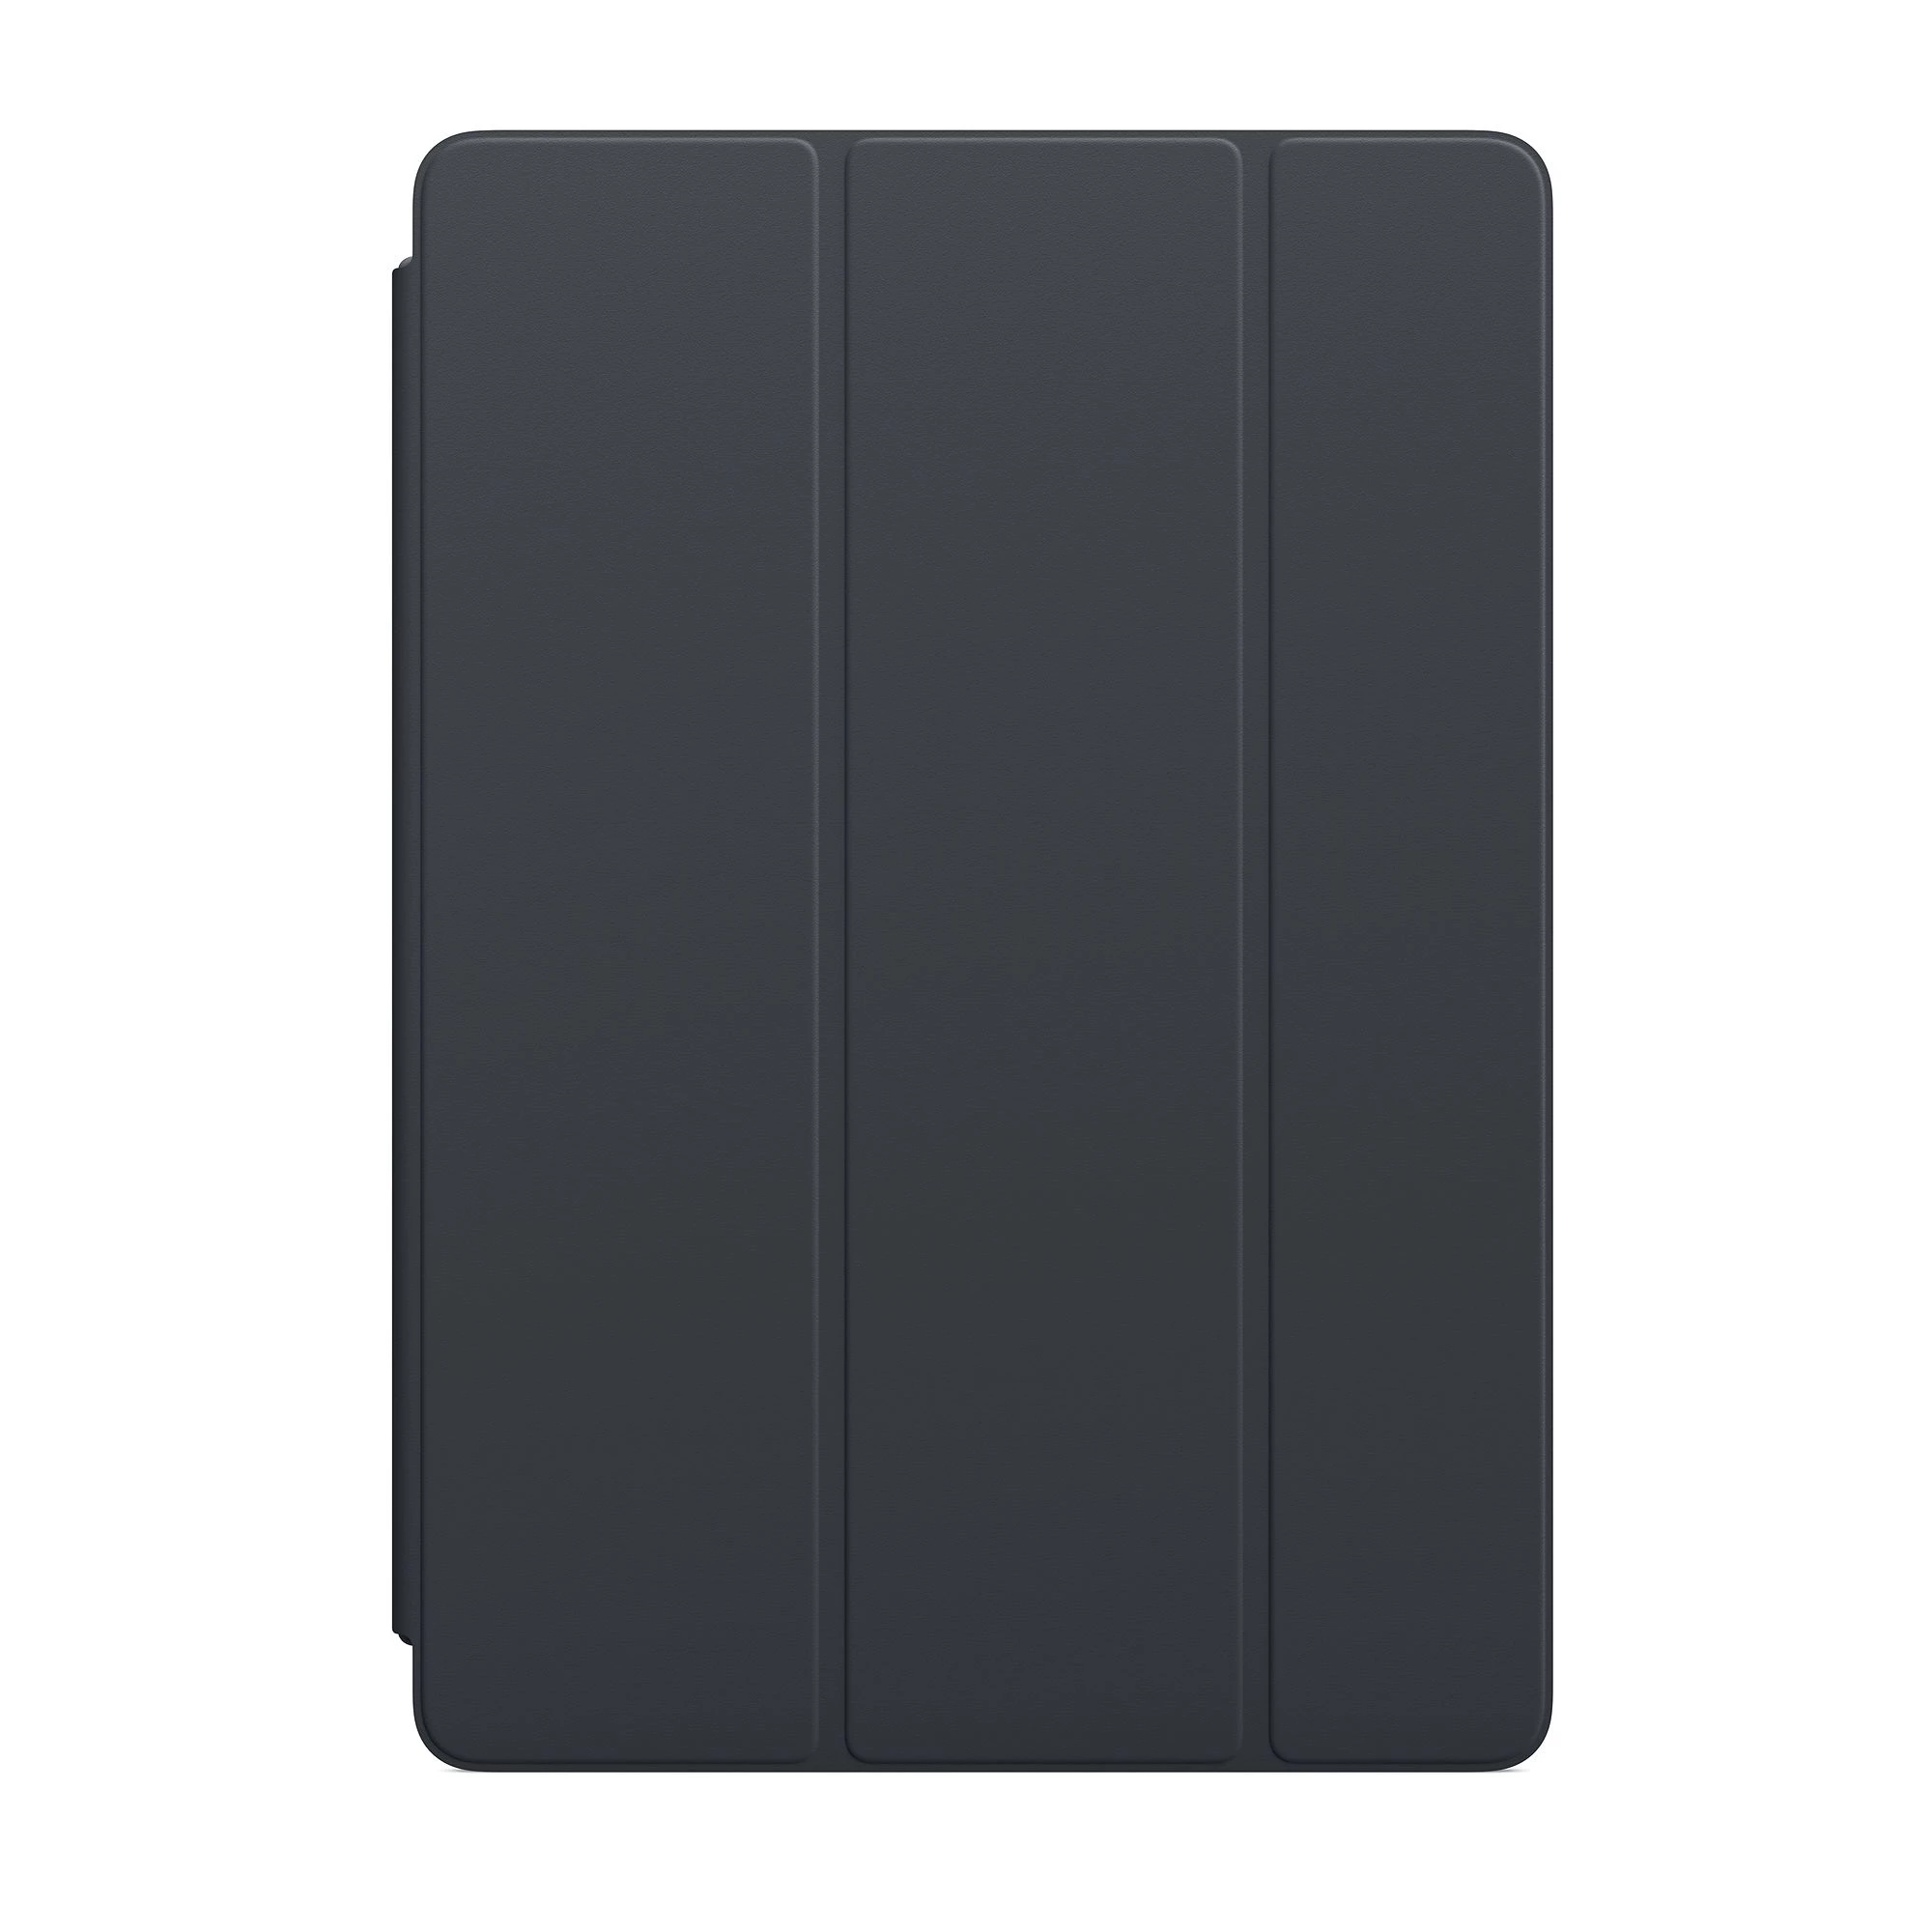 Apple Smart Cover for iPad 10.2" / Air 3 / Pro 10.5" - Charcoal Gray (MVQ22)